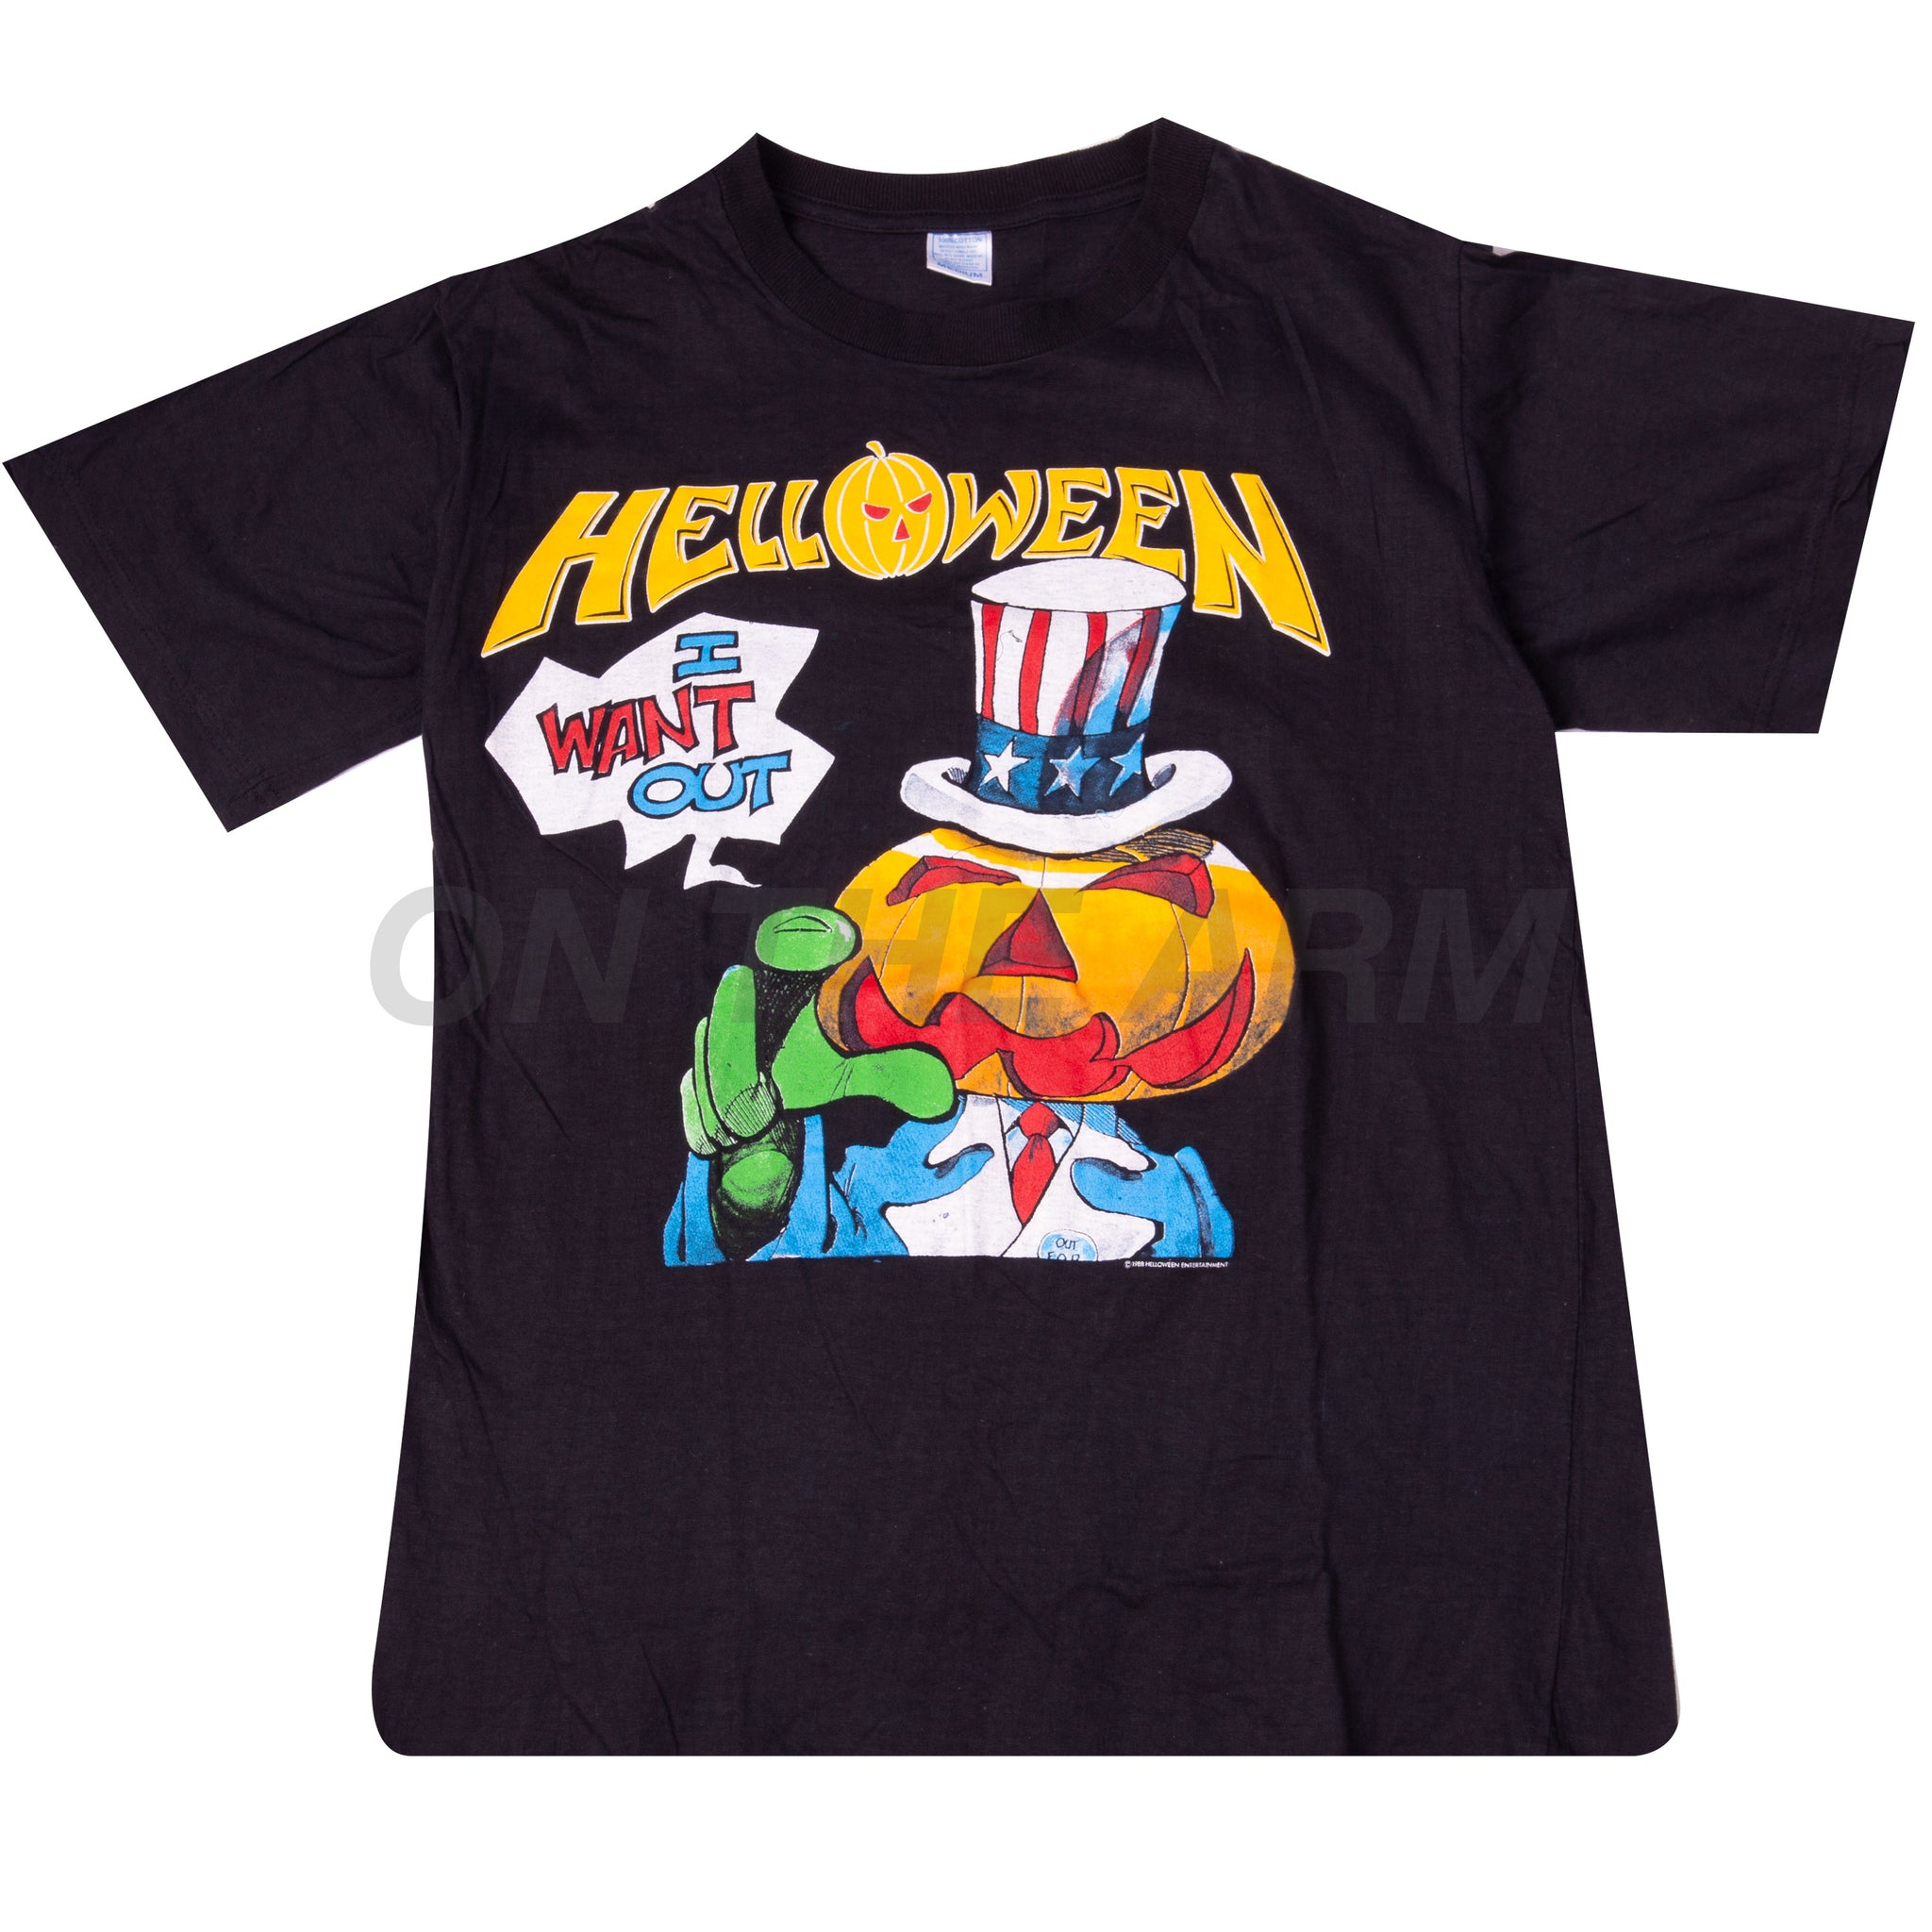 Vintage Black Helloween I Want Out Tee